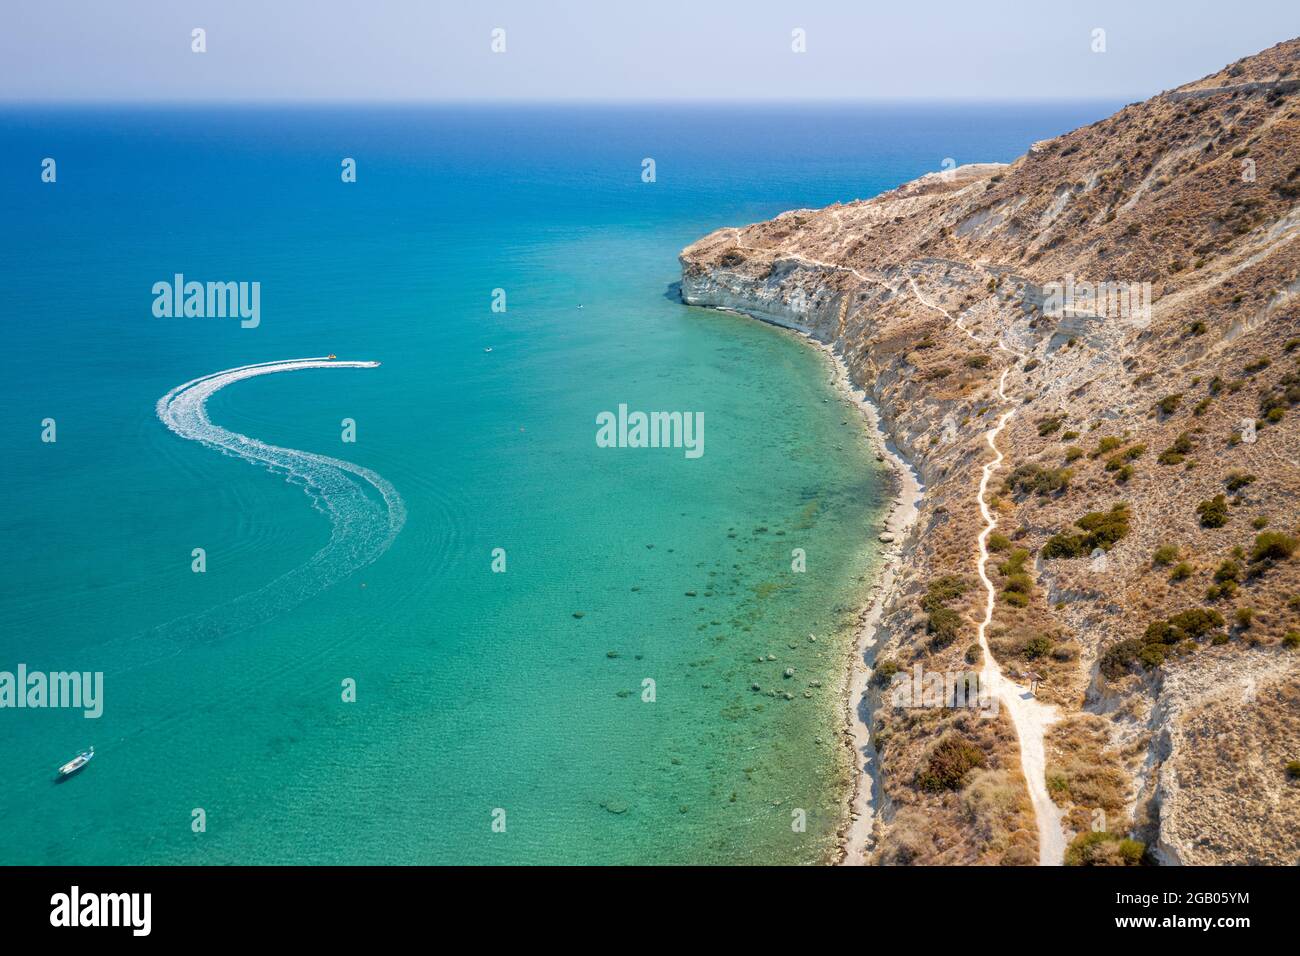 Motor boats leaving trail in Pissouri bay, Cyprus with cliffs shaped like giant turtle and Mediterranean sea on background, aerial seascape Stock Photo